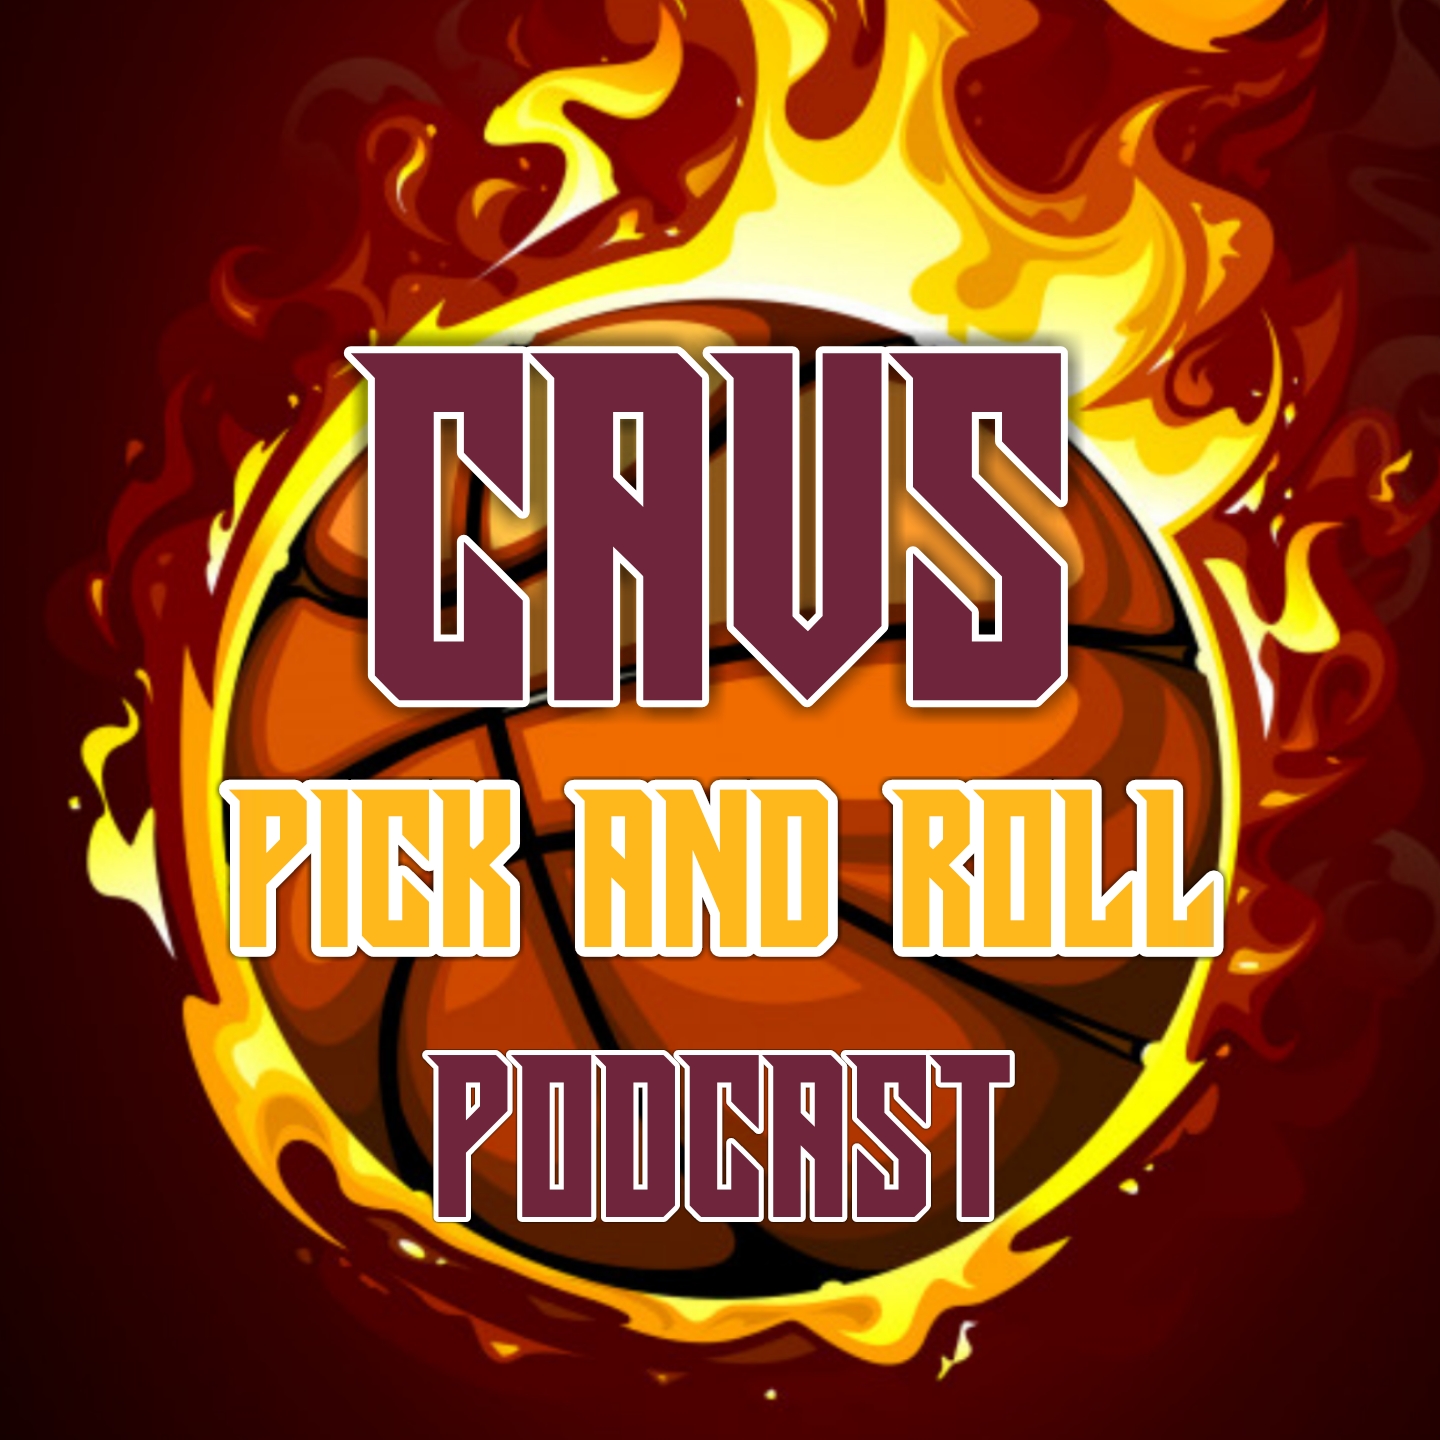 Cavs Pick and Roll Podcast